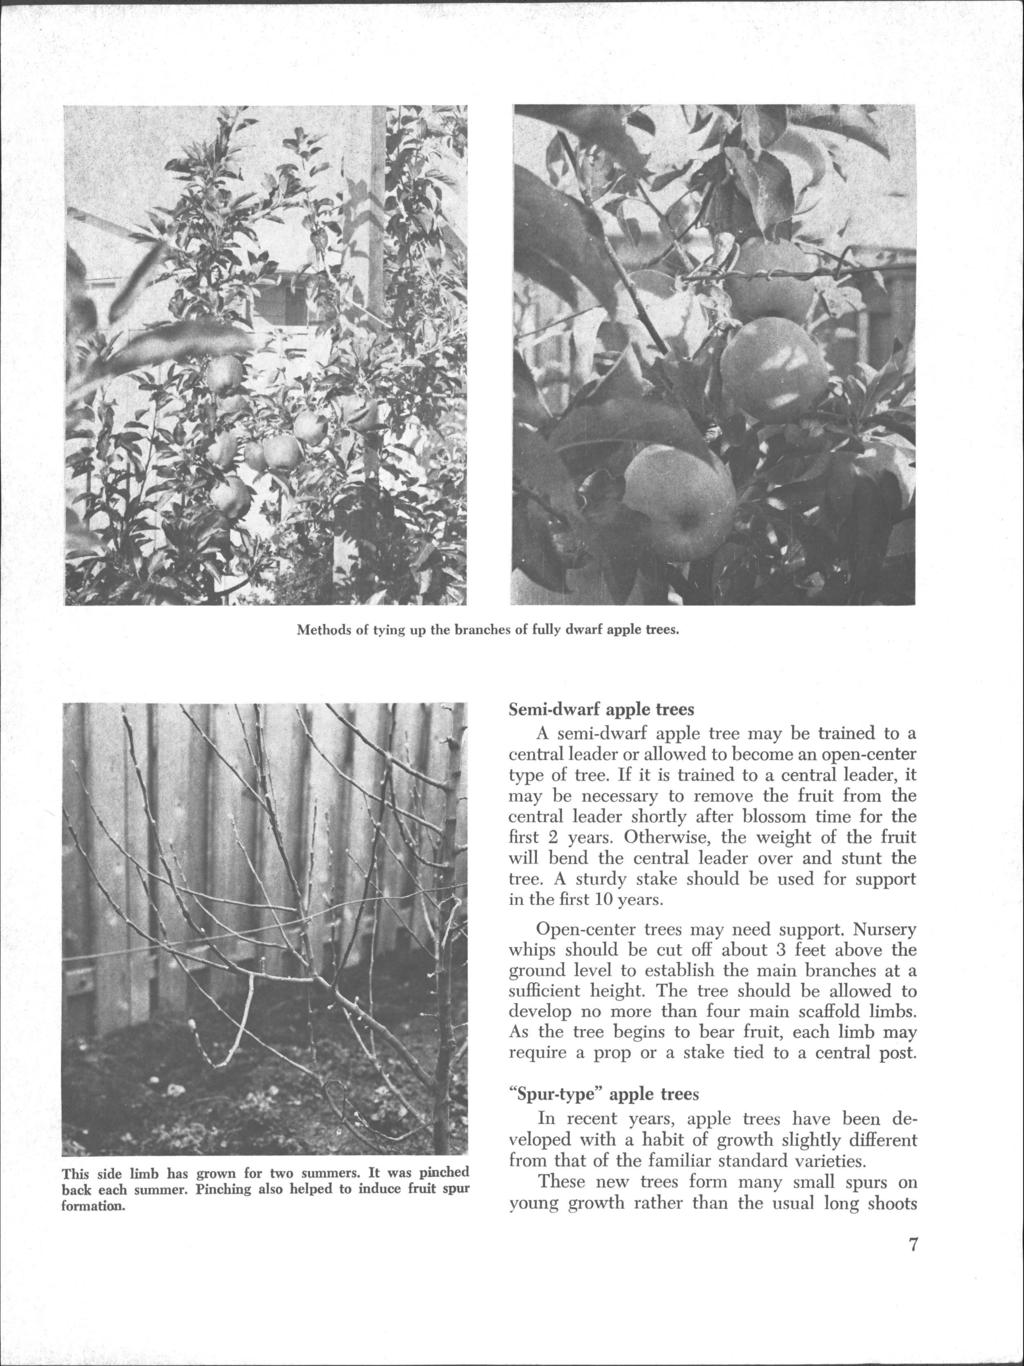 Methods of tying up the branches of fully dwarf apple trees. Semi-dwarf apple trees A semi-dwarf apple tree may be trained to a central leader or allowed to become an open-center type of tree.